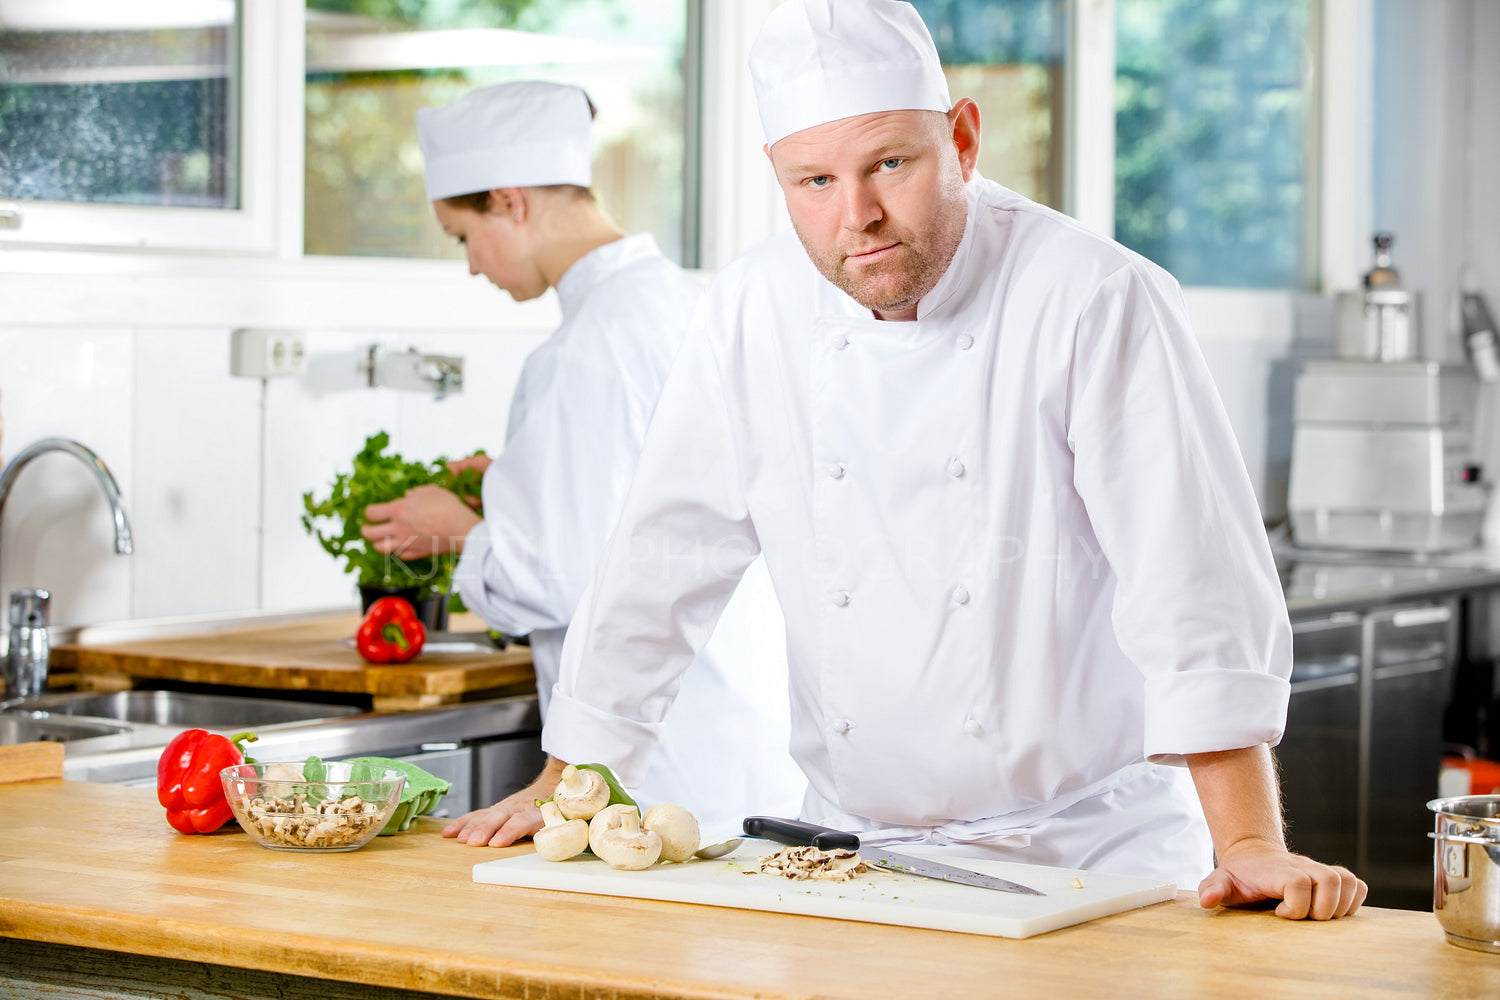 Confident chef making food in large kitchen